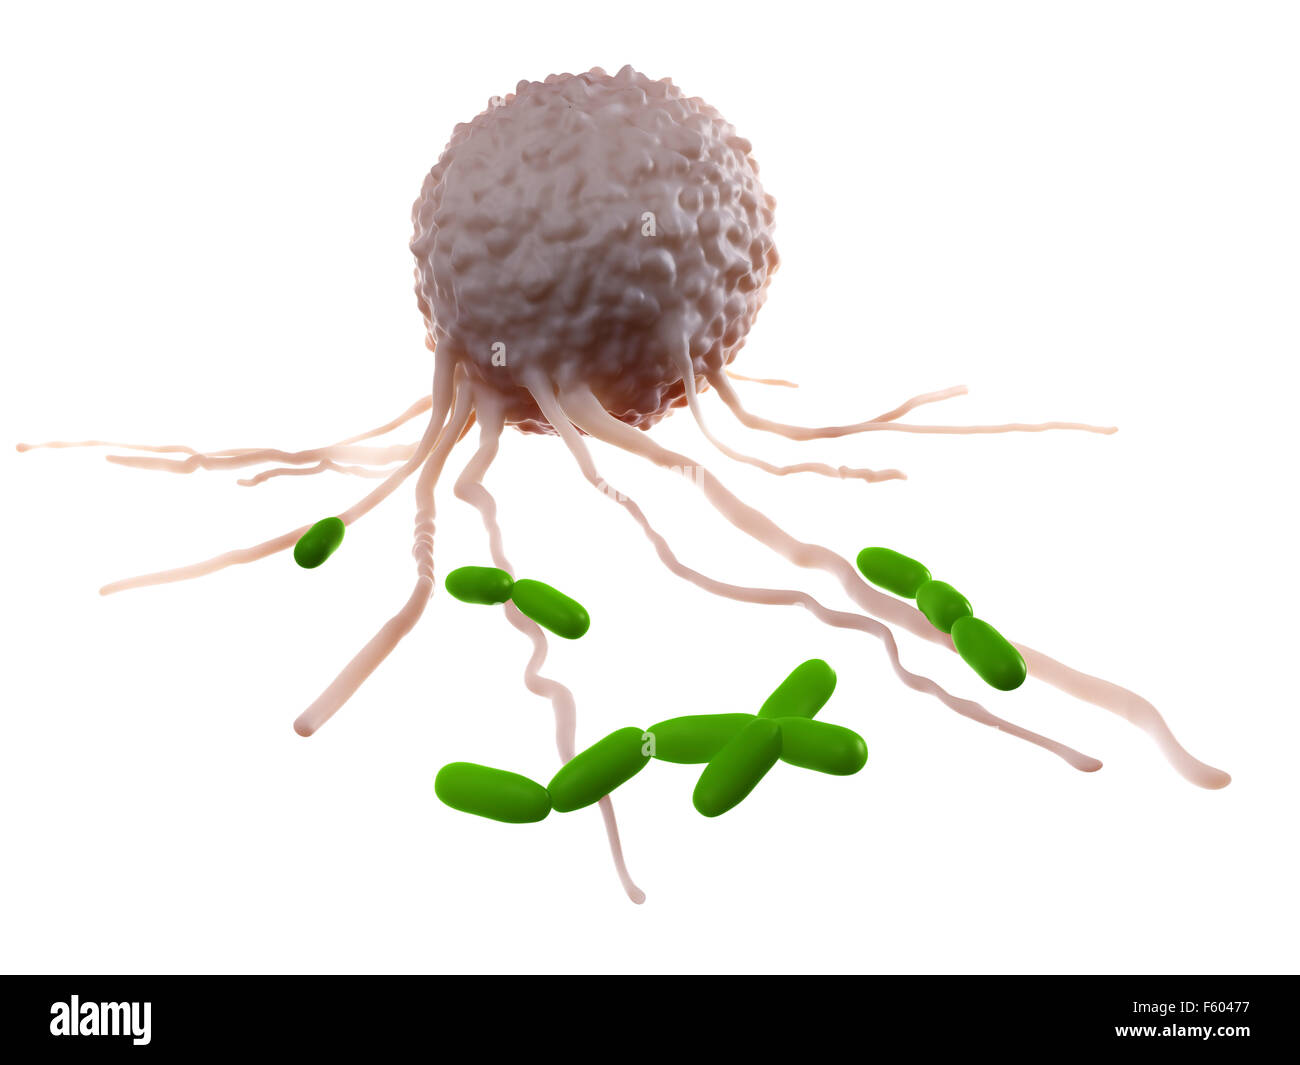 medically accurate illustration of a leucocyte attacking bacteria Stock Photo